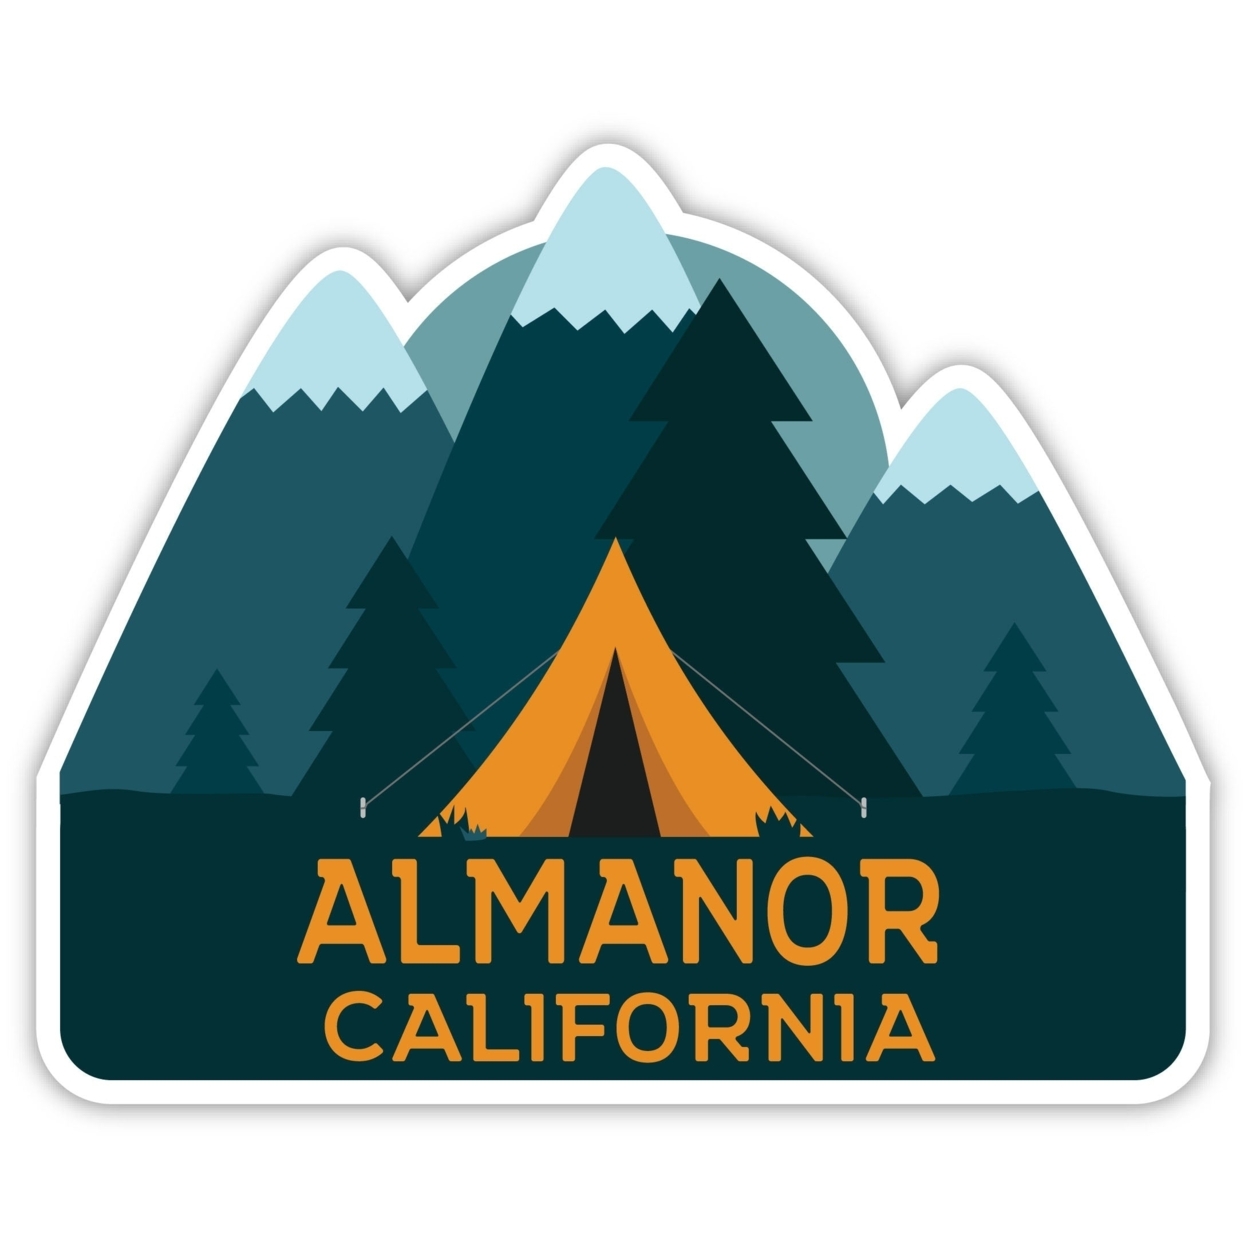 Almanor California Souvenir Decorative Stickers (Choose Theme And Size) - 4-Pack, 12-Inch, Tent